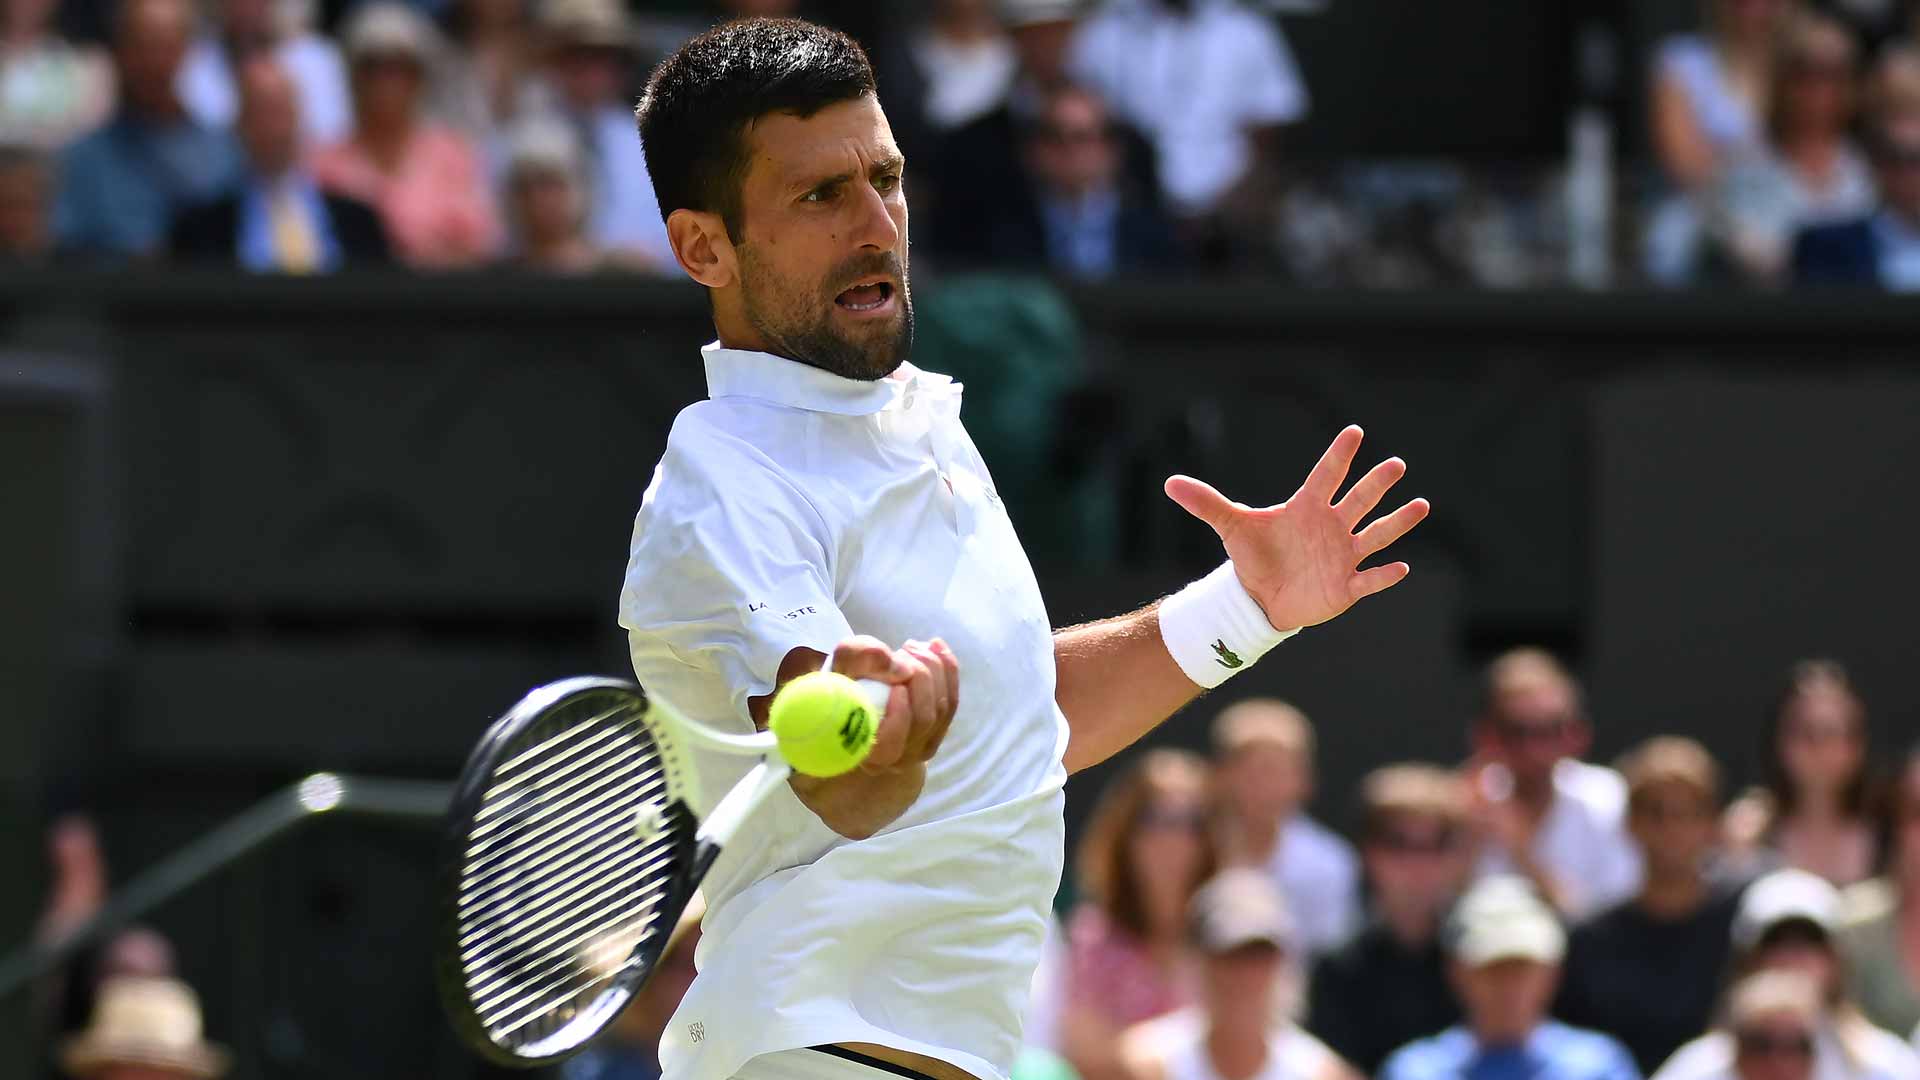 Novak Djokovic last competed at Wimbledon, where he reached the final.